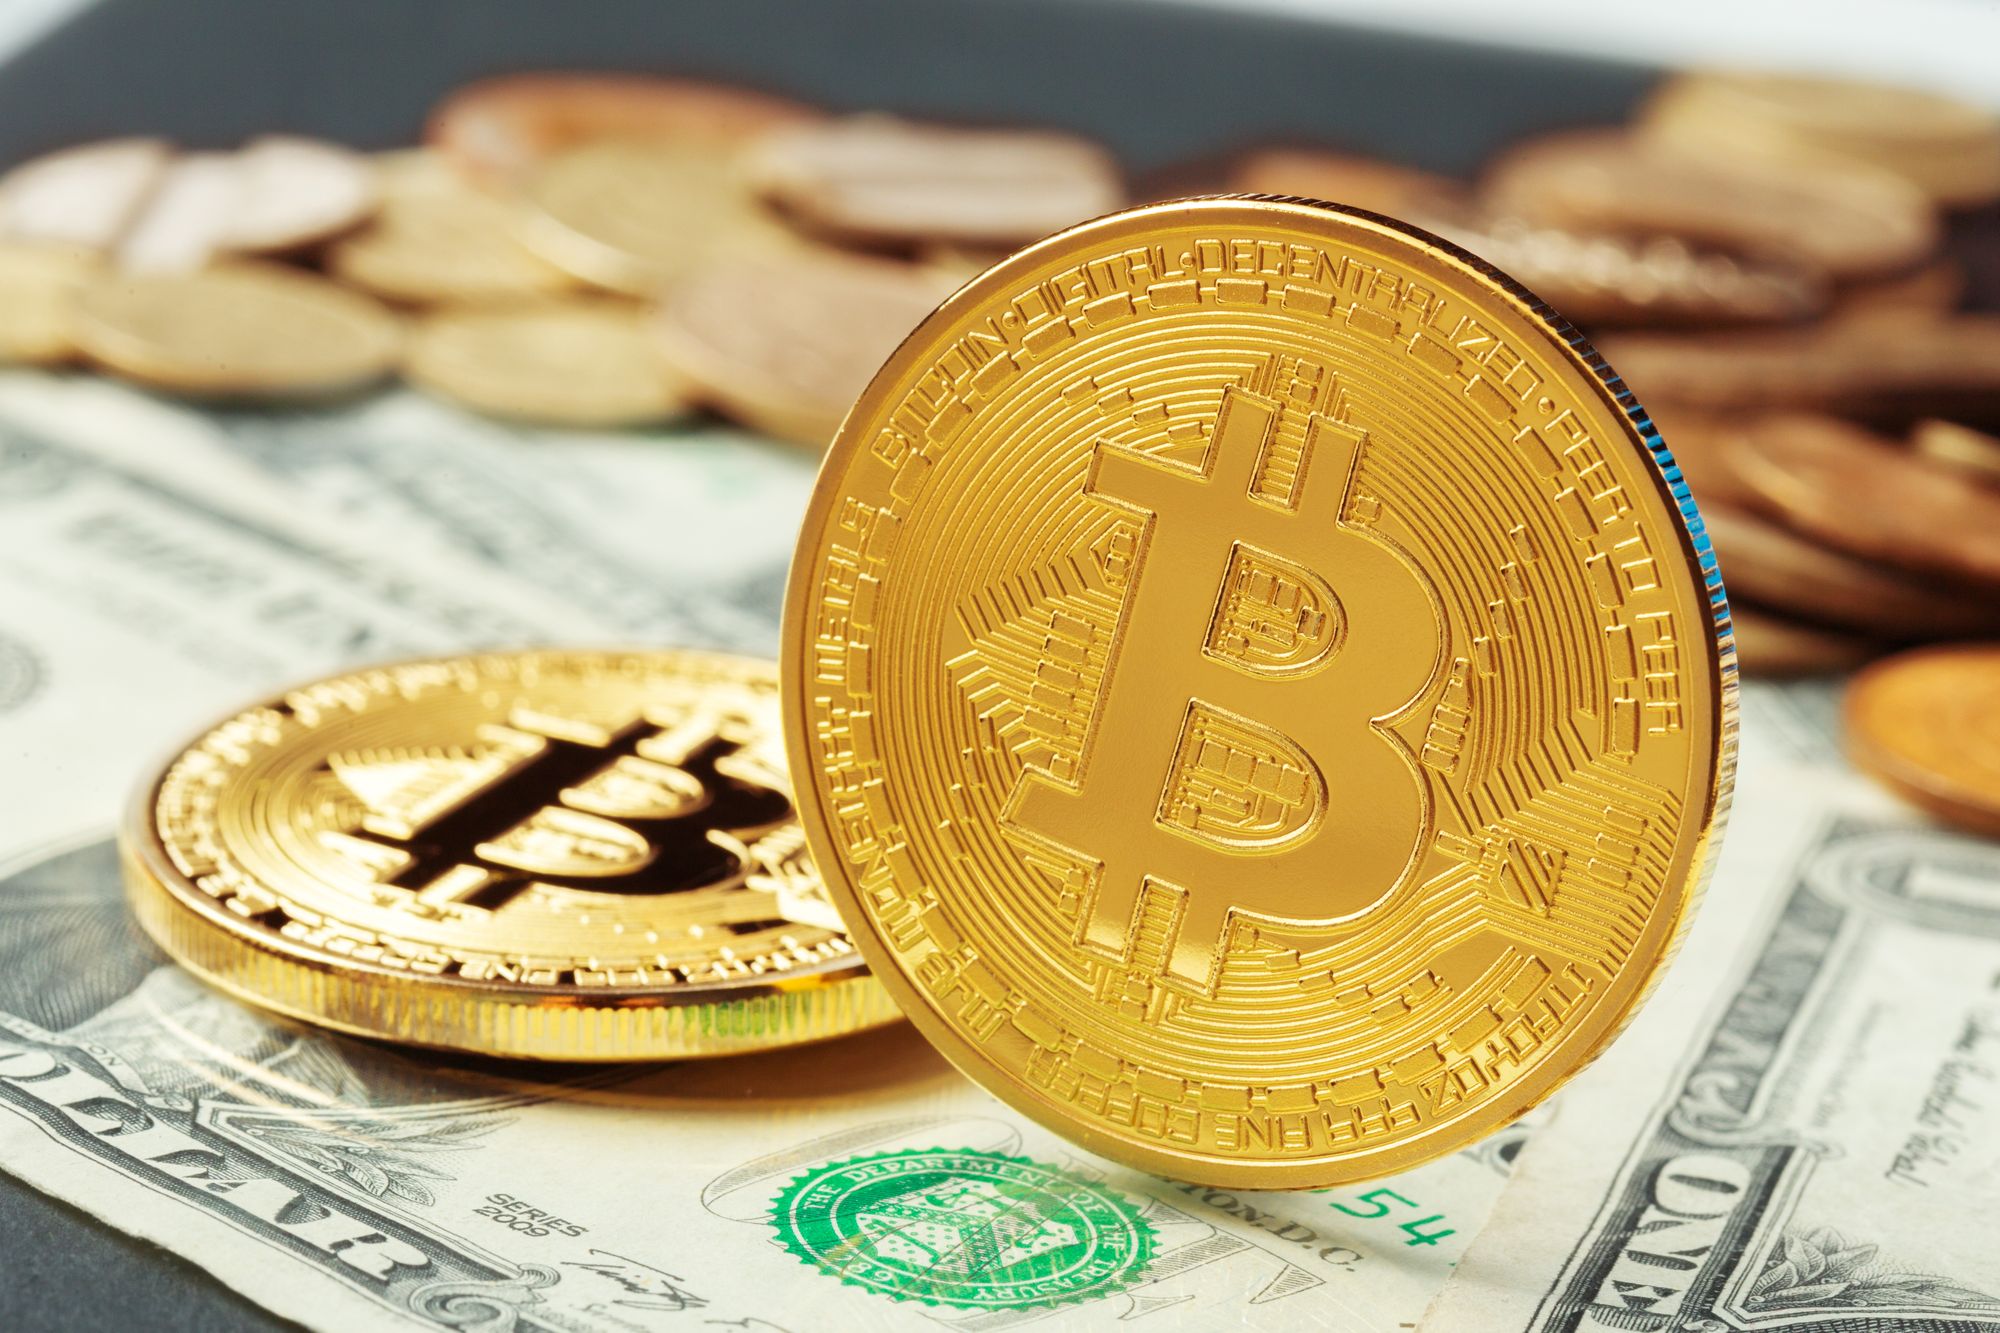 Under the CFTC's Supervision, Bitcoin could 'Double in Price'